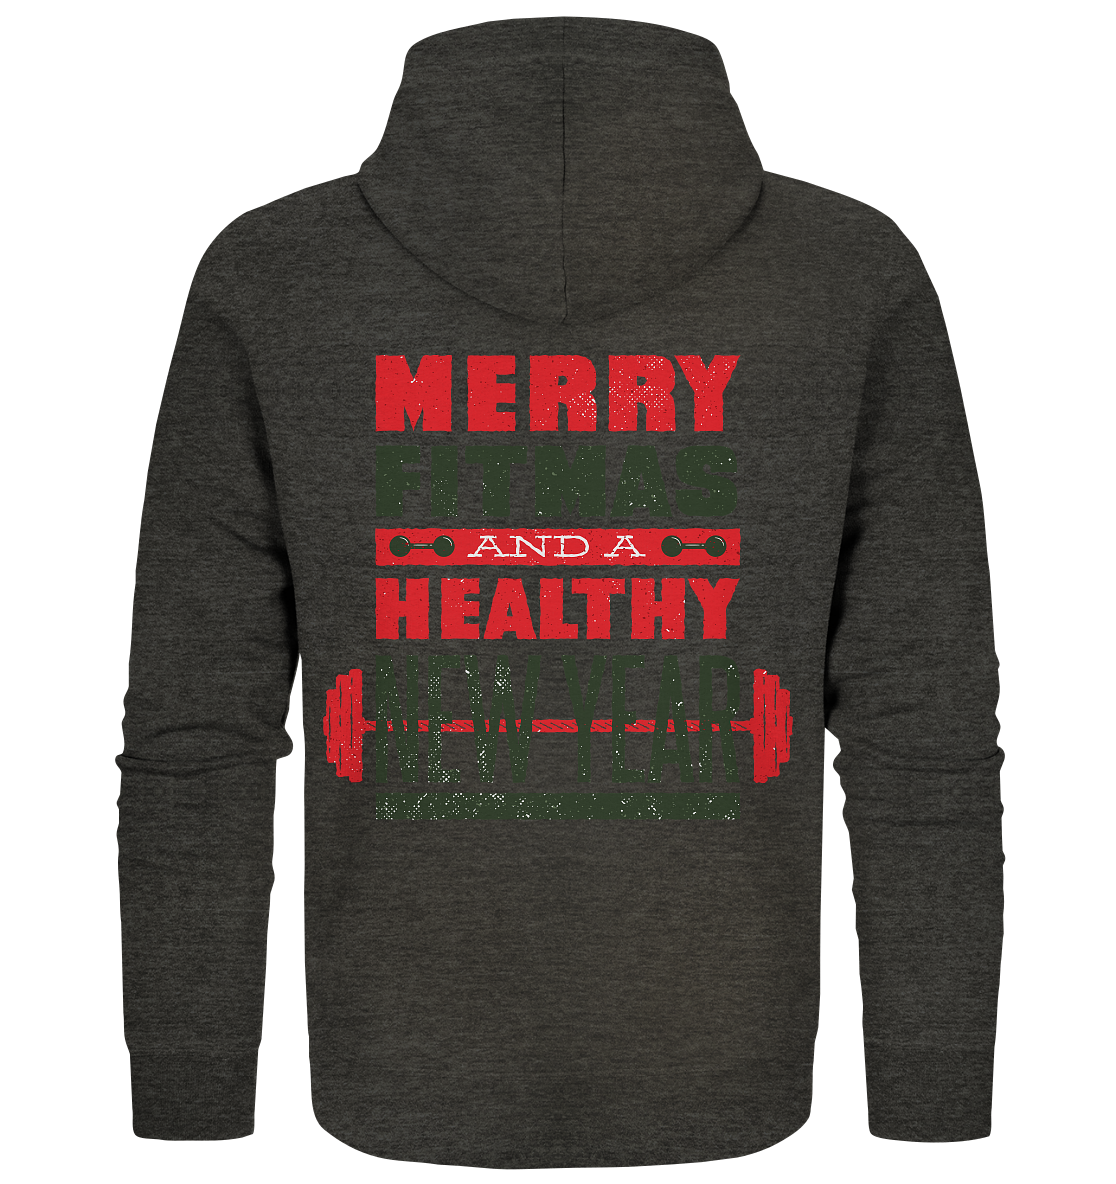 Weihnachtliches Design, Gym, Merry Fitmas and a Healthy New Year - Organic Zipper